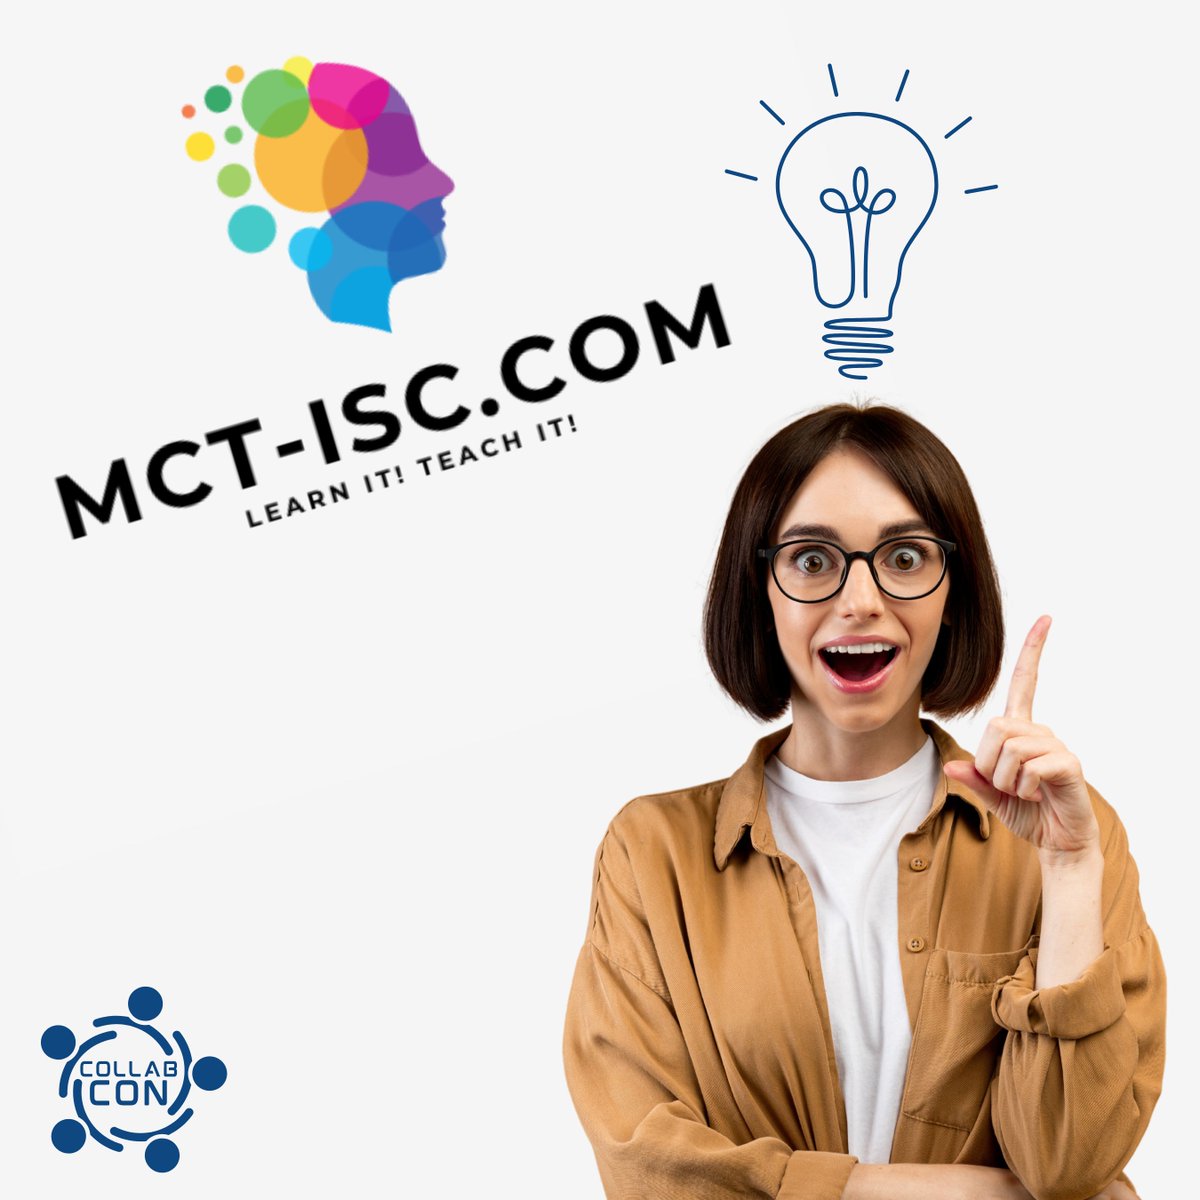 Want to be an #MCT and need to fulfill the Instructional Skills requirement? MCT-ISC.com, a #CollabCon Community Sponsor, is hosting an 'Instructional Skills Class for Prospective MCTs' on 9/13-14 in FL.

More info at tinyurl.com/5db9e78b. #MicrosoftCertification